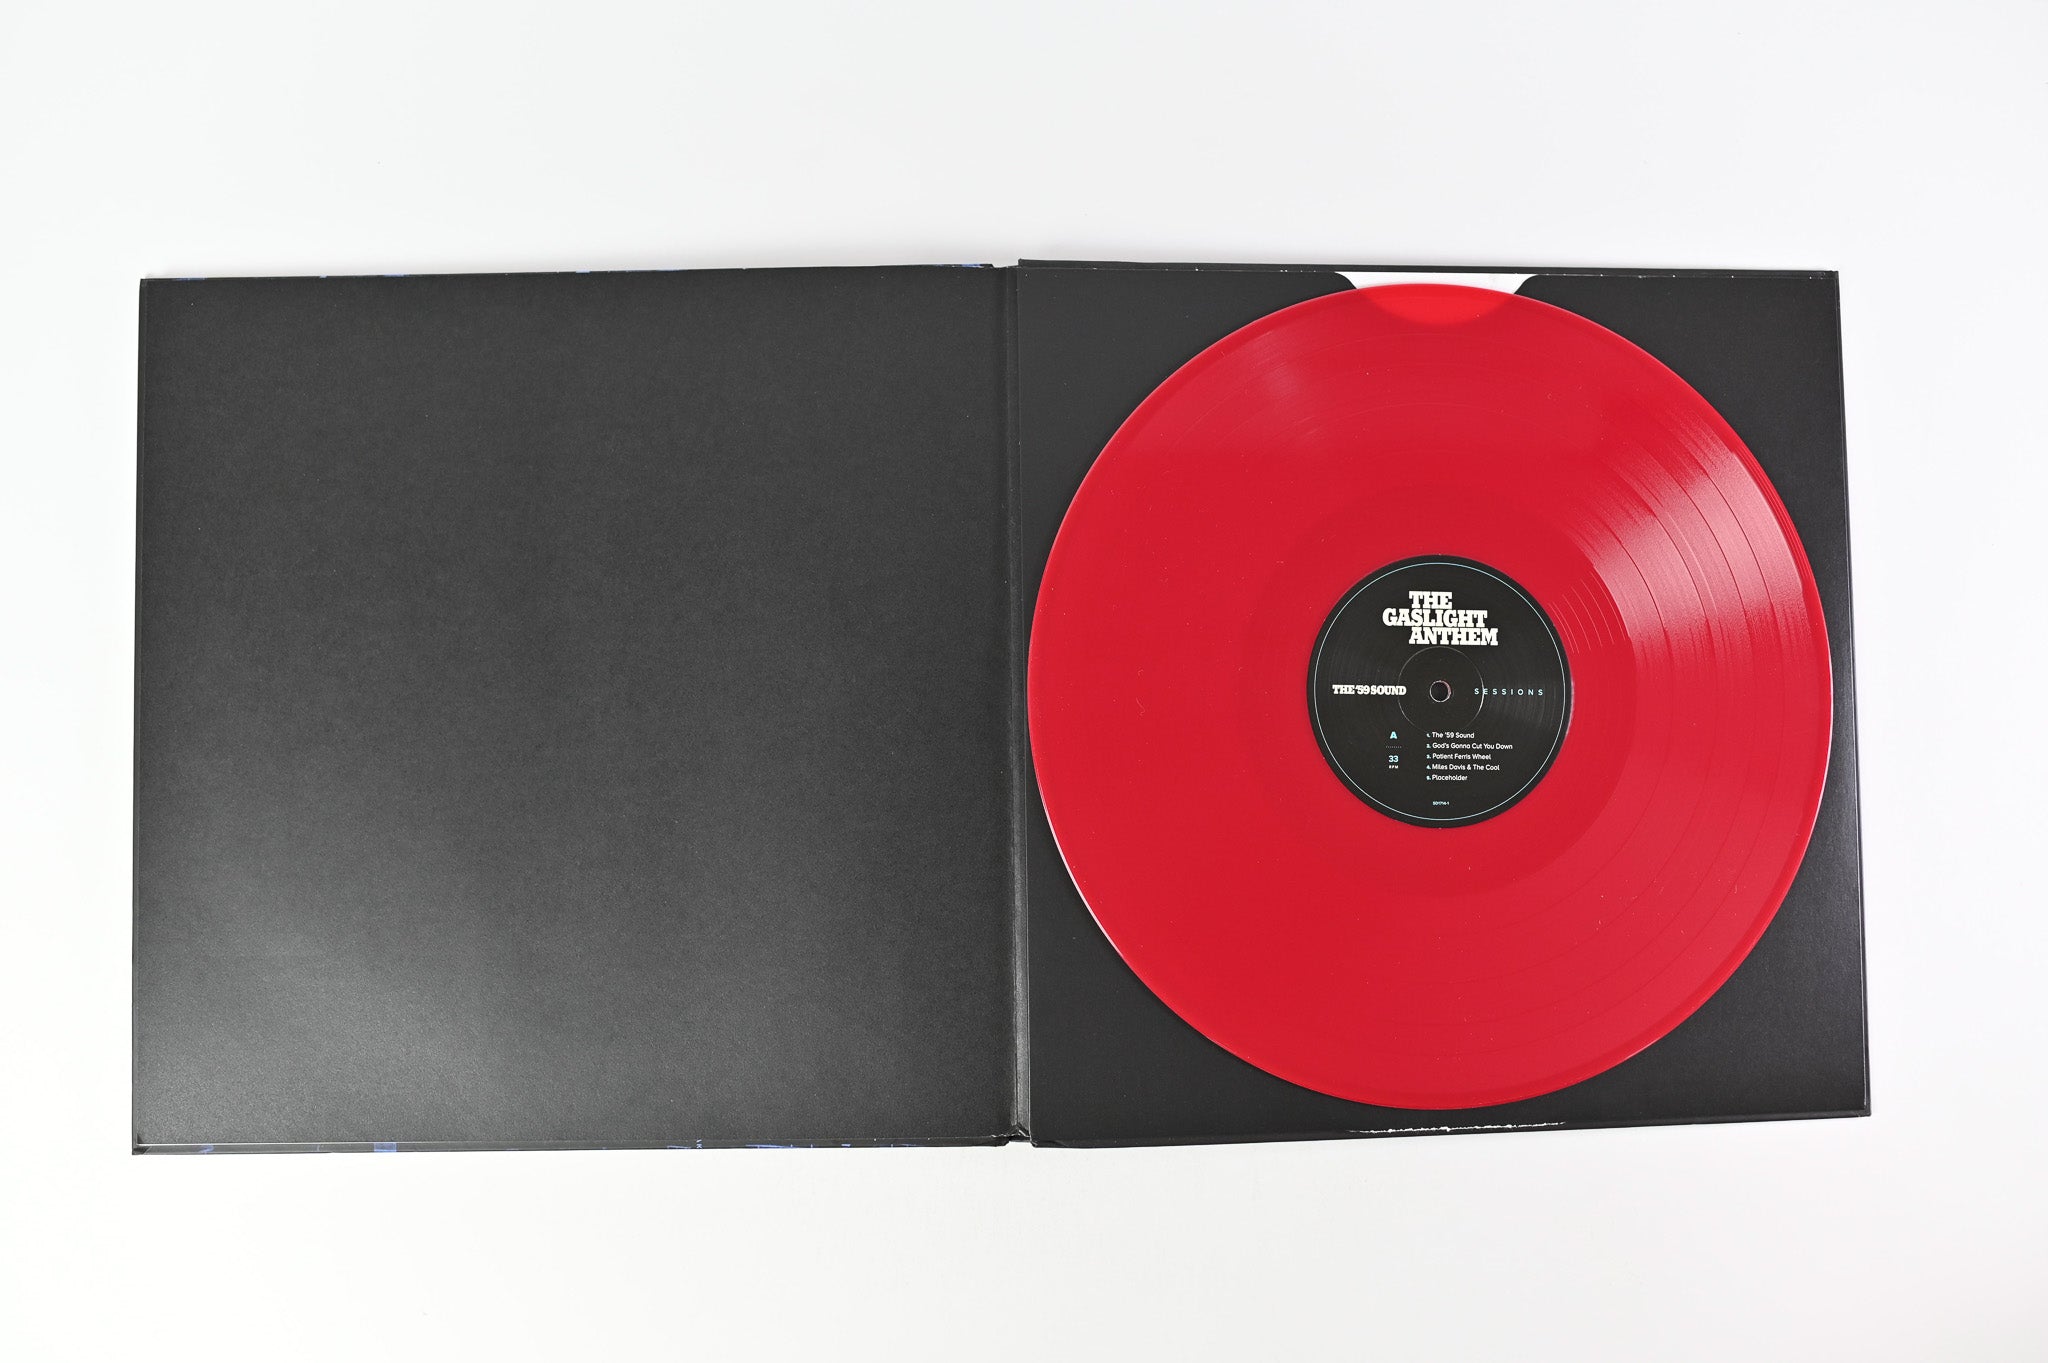 The Gaslight Anthem - The ’59 Sound Sessions on SideOneDummy Deluxe Ltd Edition Red Photobook